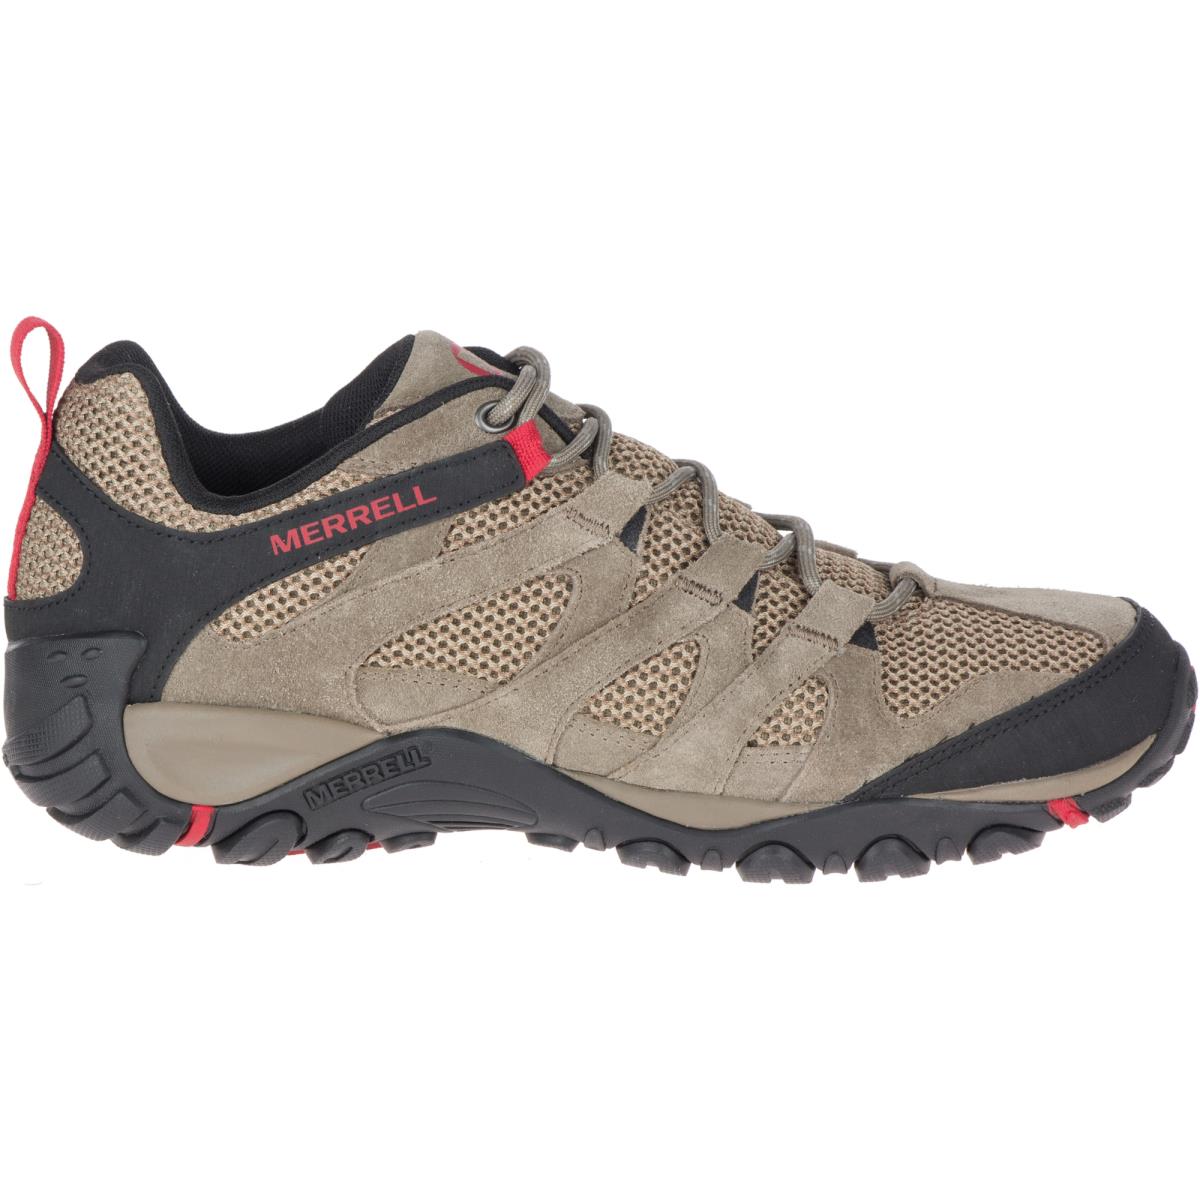 Merrell Men Alverstone Wide Width Hiking Shoes Suede Leather-and-mesh Boulder